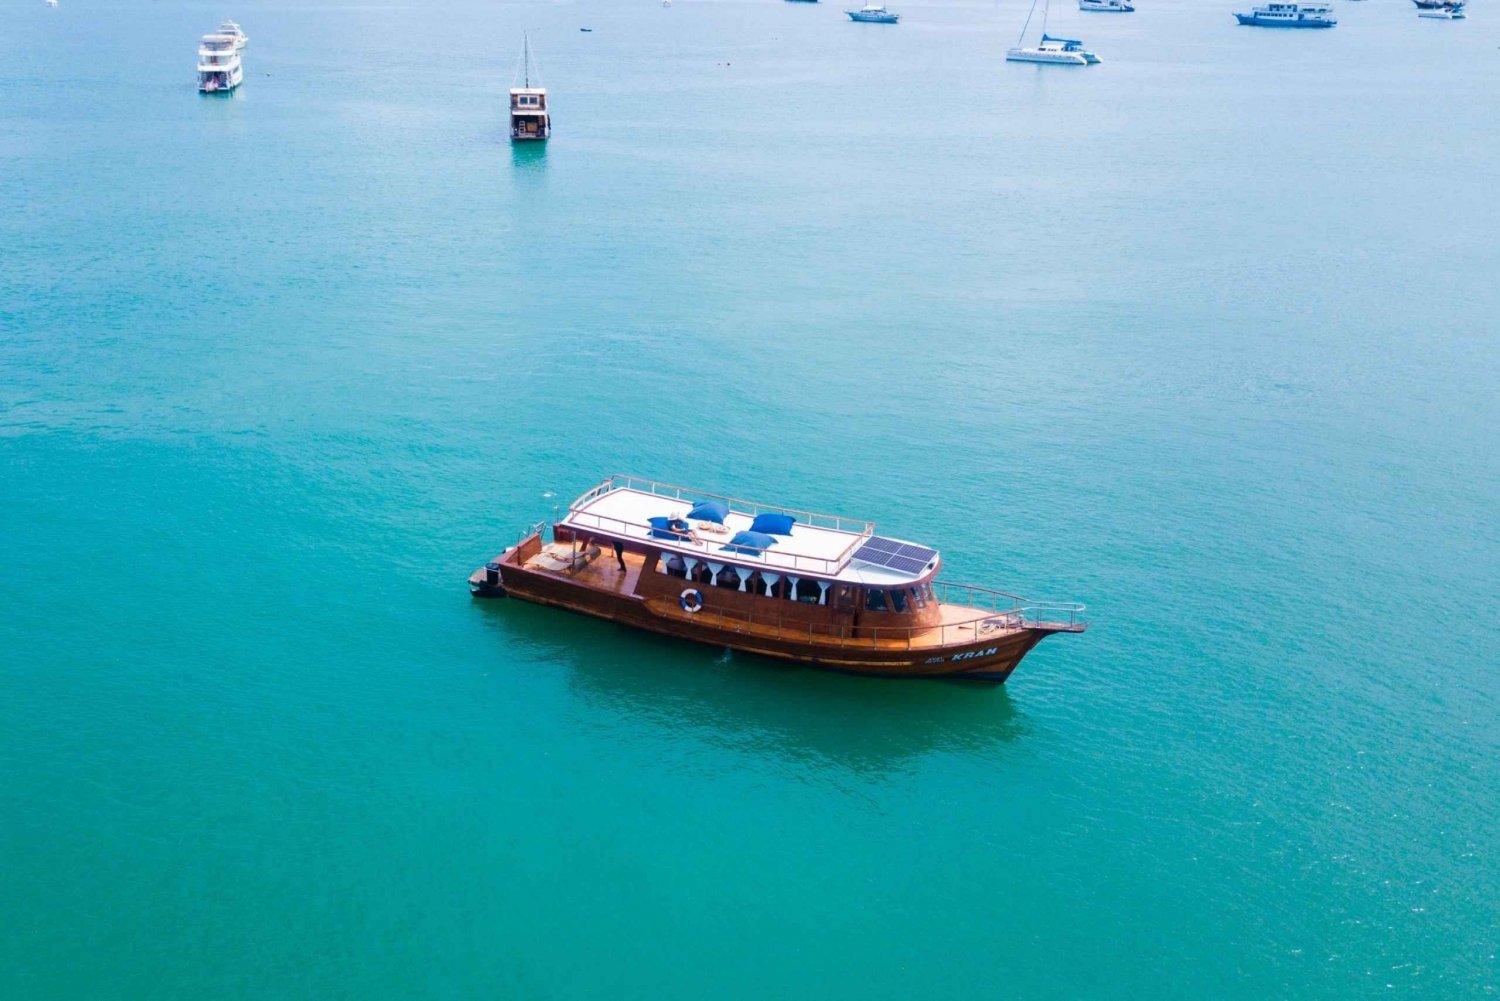 From Phuket: Vintage Wooden Boat Charter to Racha Island